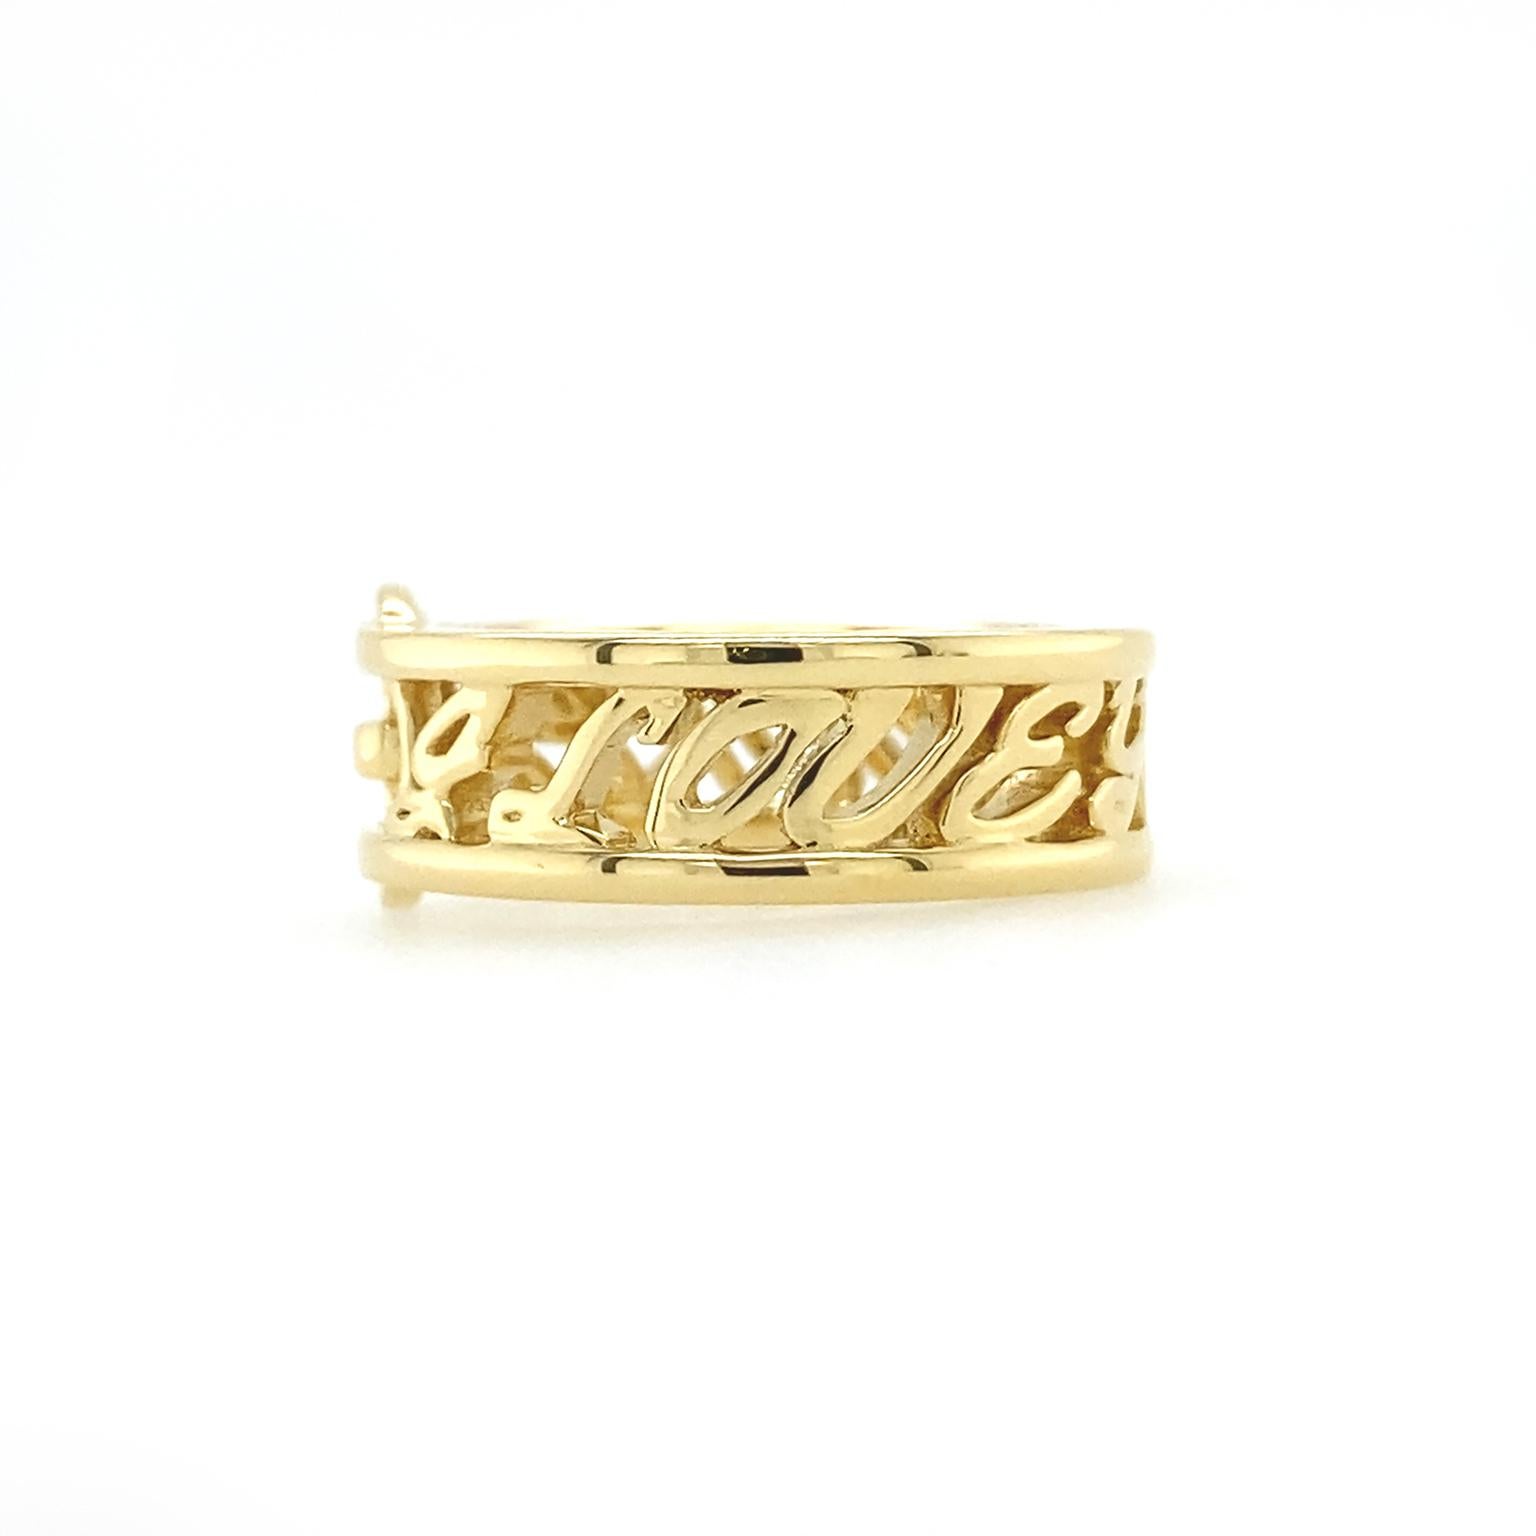 Several touches make this ring stand out. One is a buckle, complete with bar, prong and oval frame. The words 'I love you more' span the rest of the band, with cursive letters traveling between thin shanks. Taken together, the buckle turns the